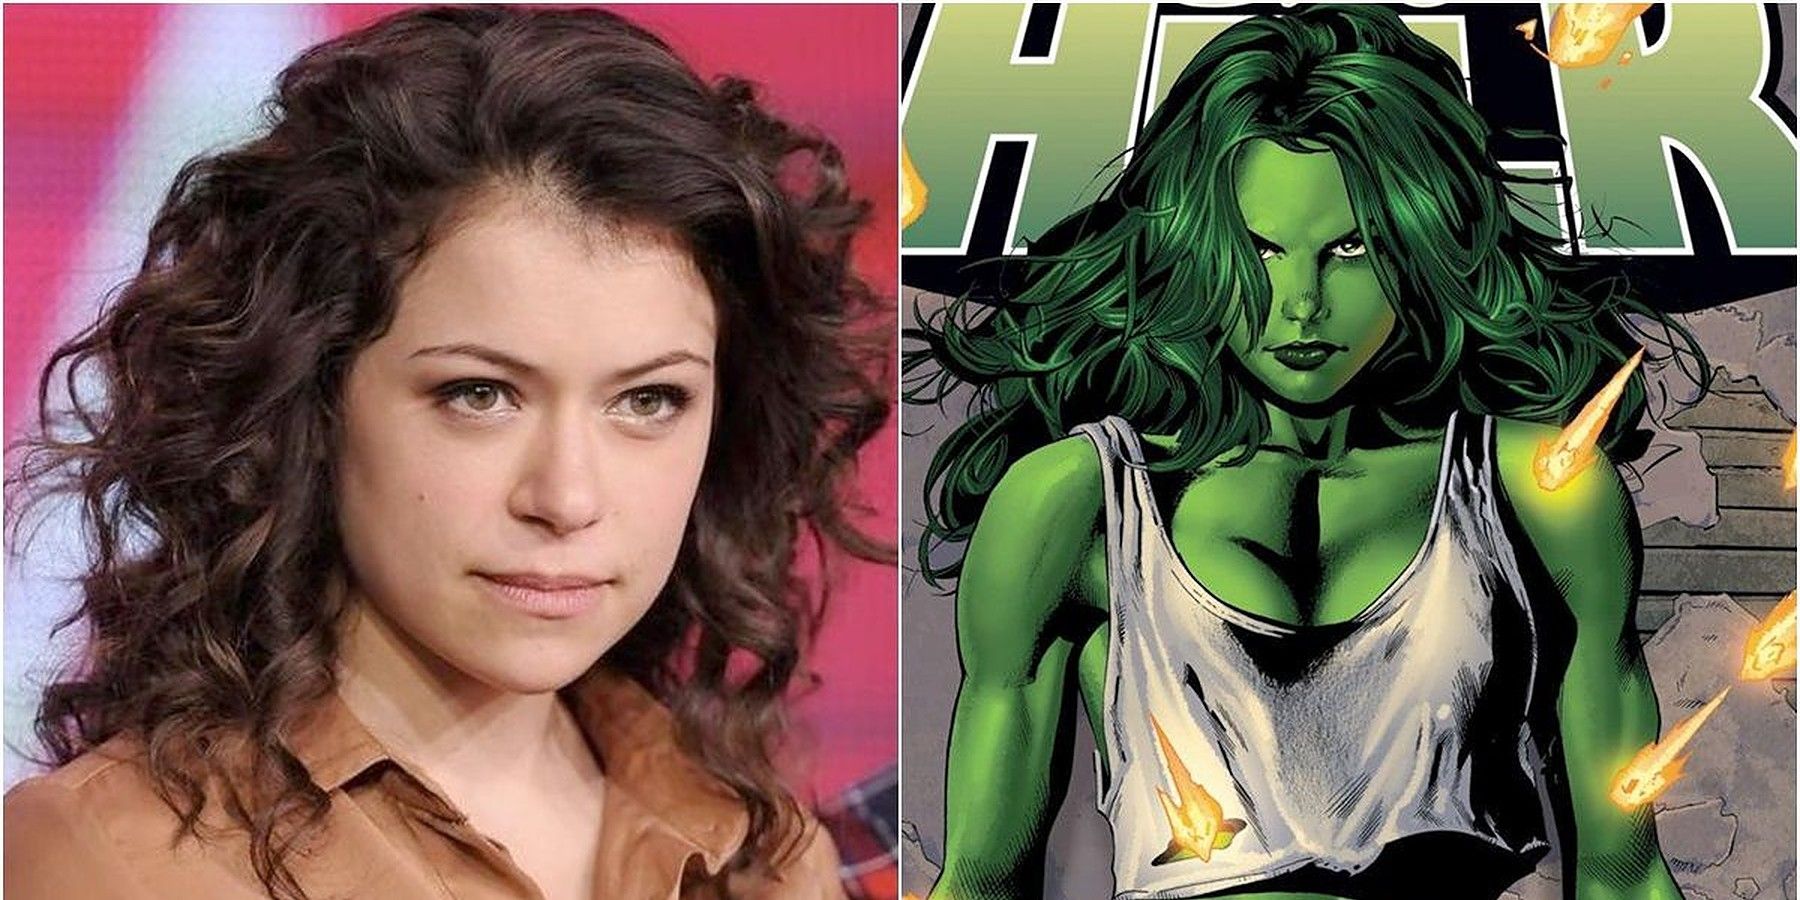 Who Is Tatiana Maslany 10 Facts About The Mcus She Hulk Actress